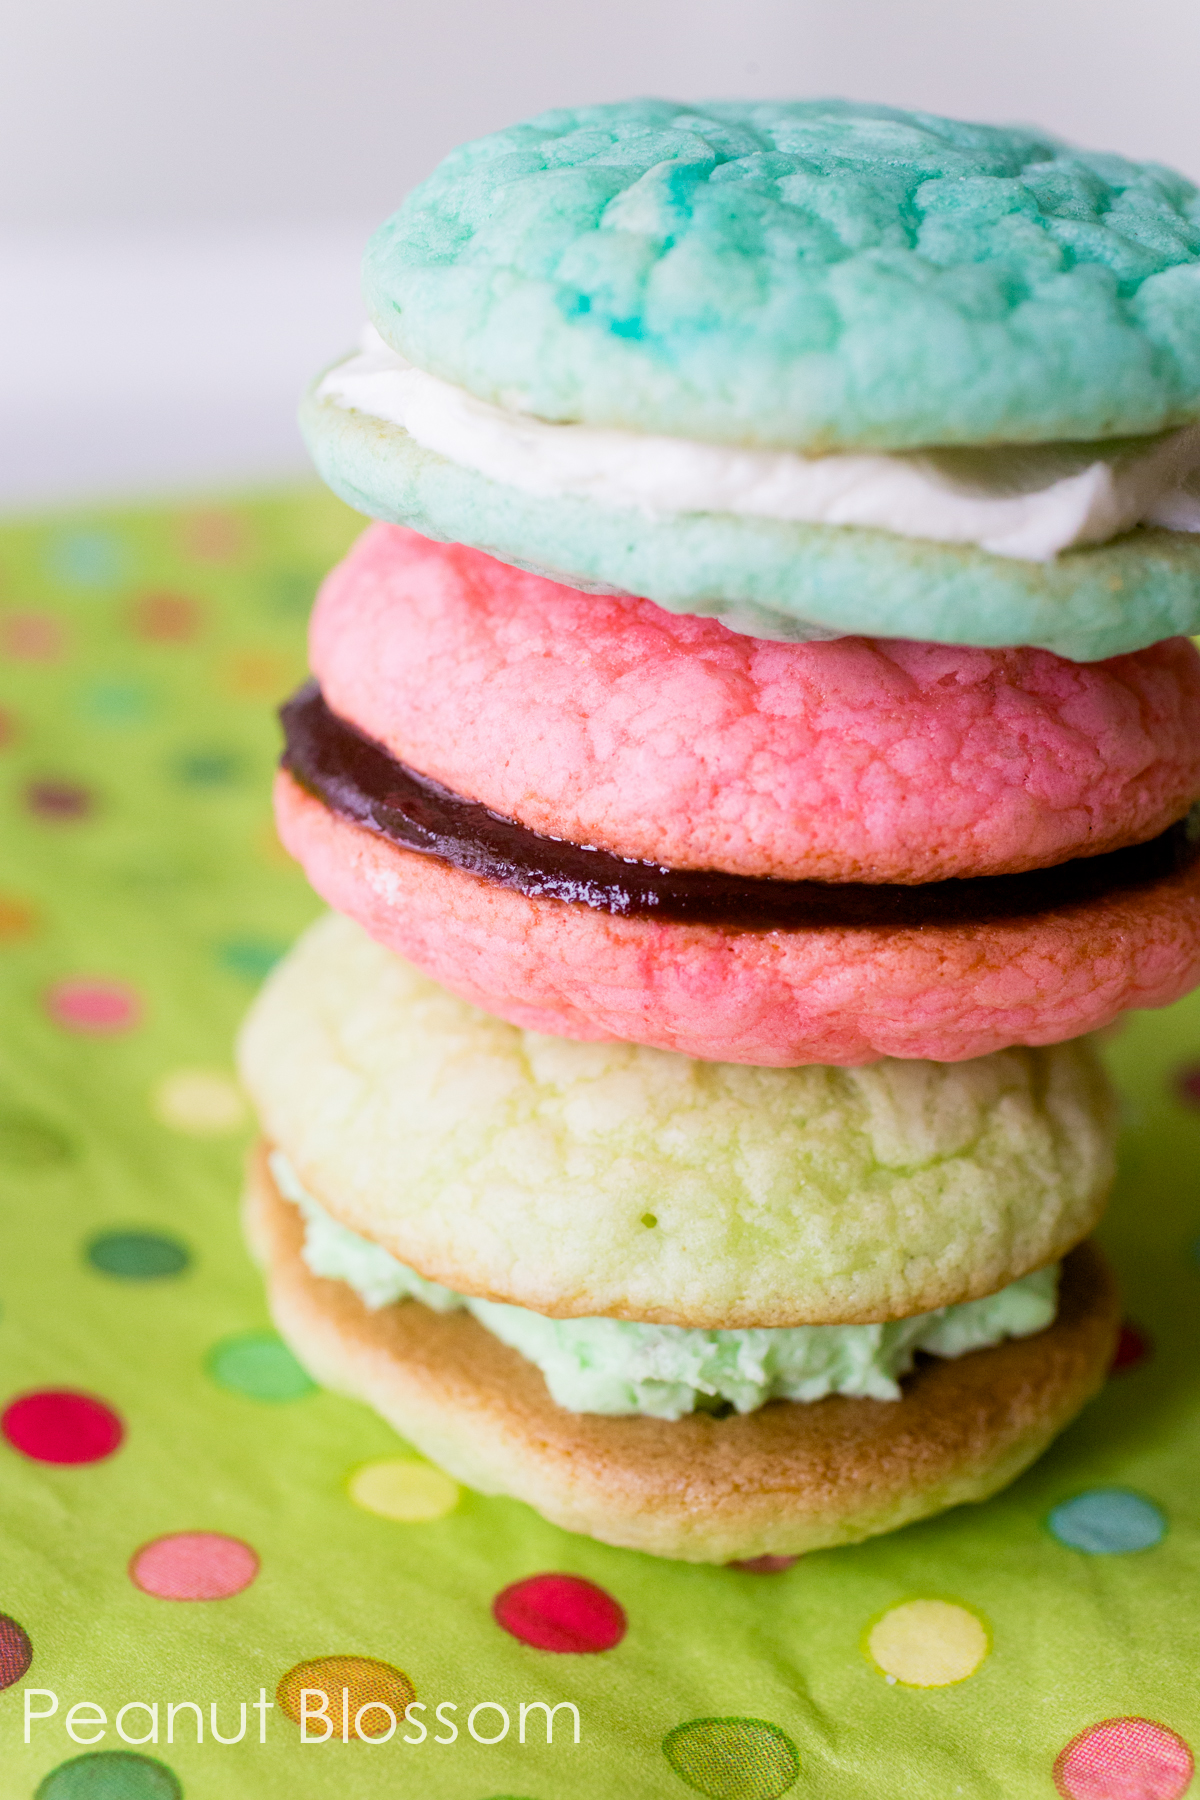 Host an American Girl Grace movie party and serve homemade kid-friendly macarons in three flavors